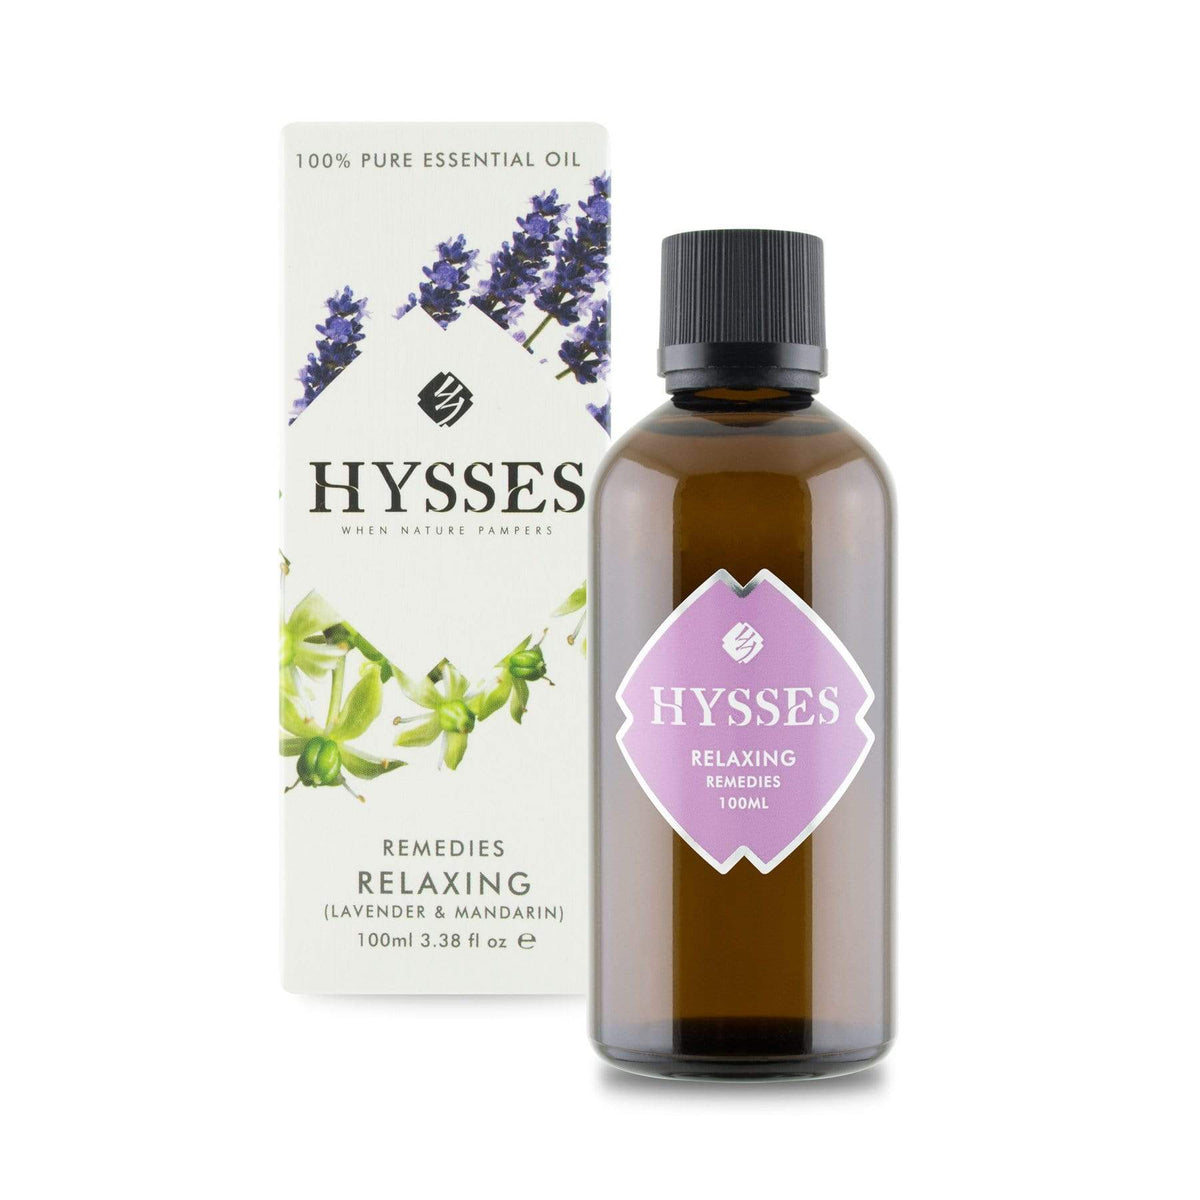 Hysses Essential Oil 100ml Remedies, Relaxing